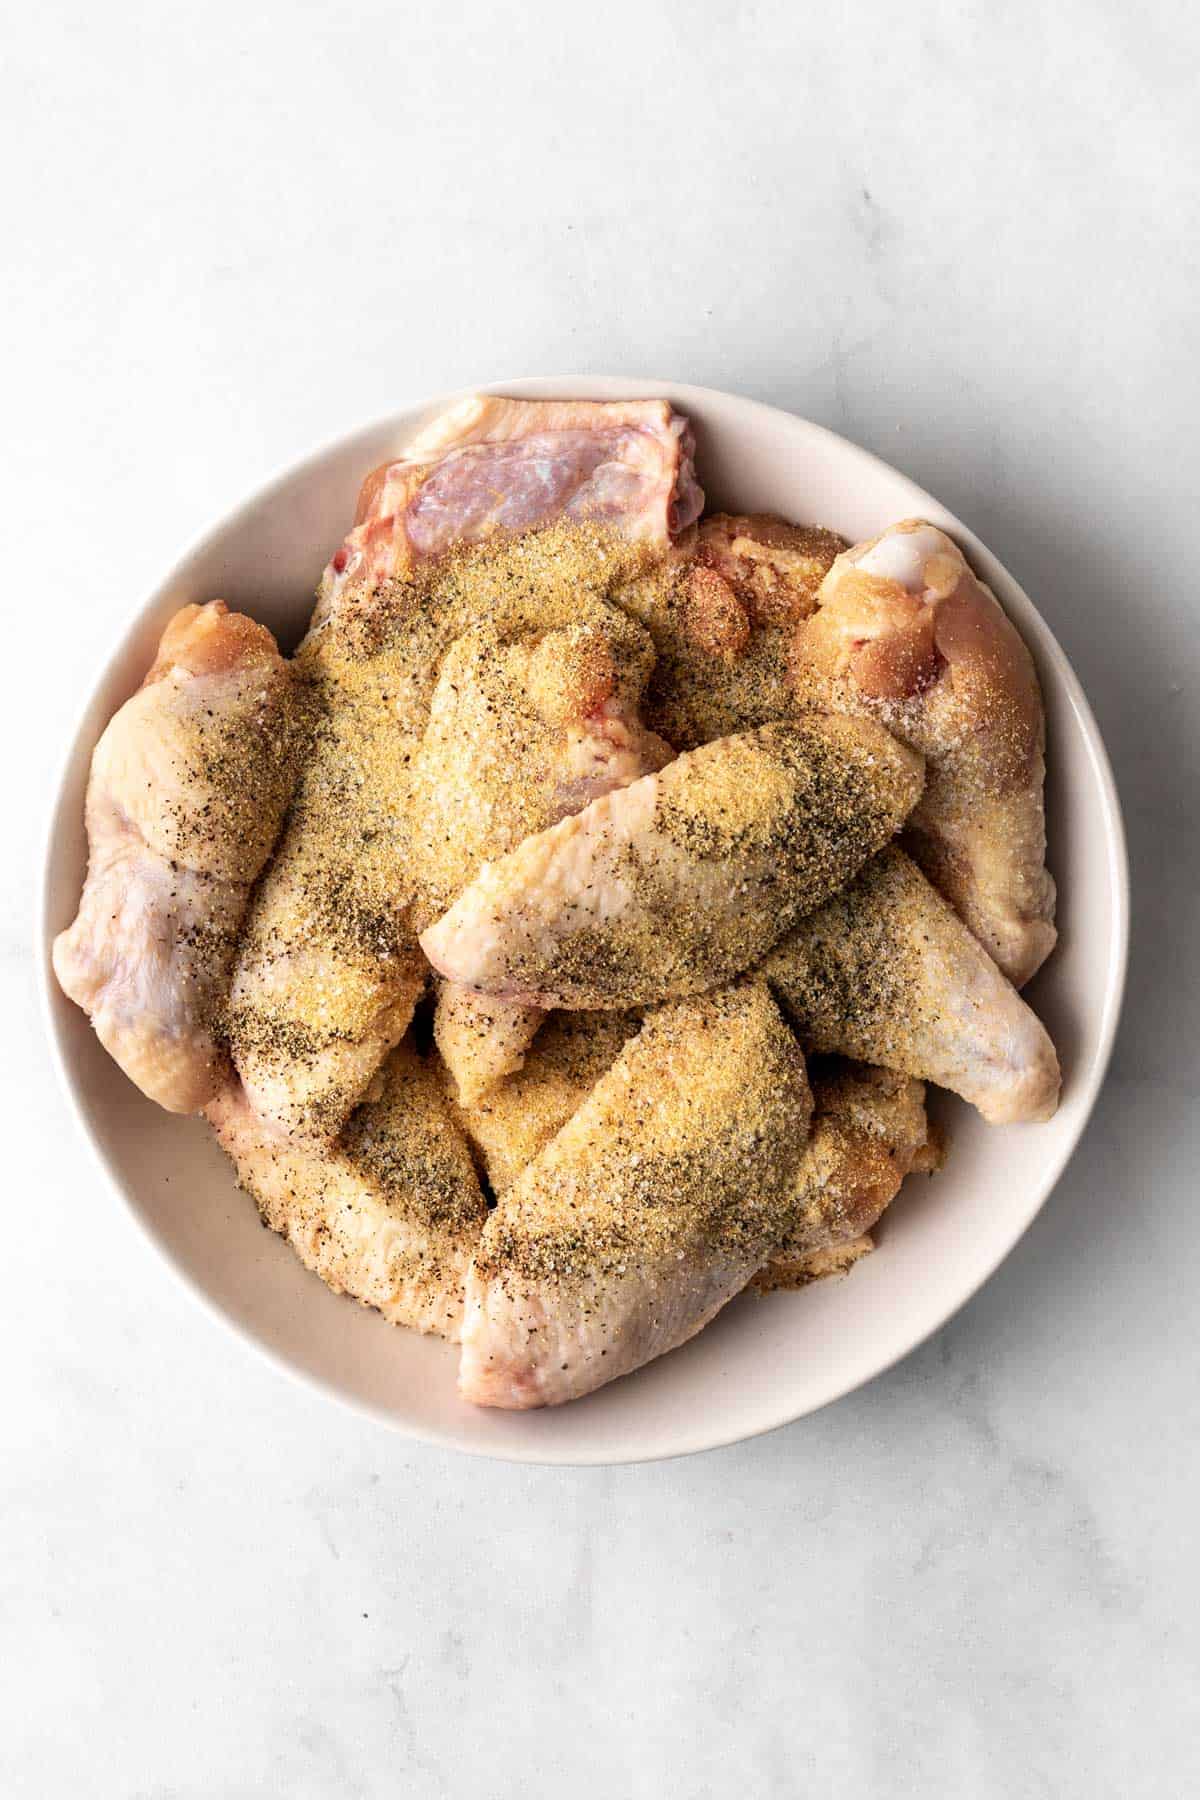 Raw chicken wings in a white bowl with salt, pepper, and garlic powder on top.